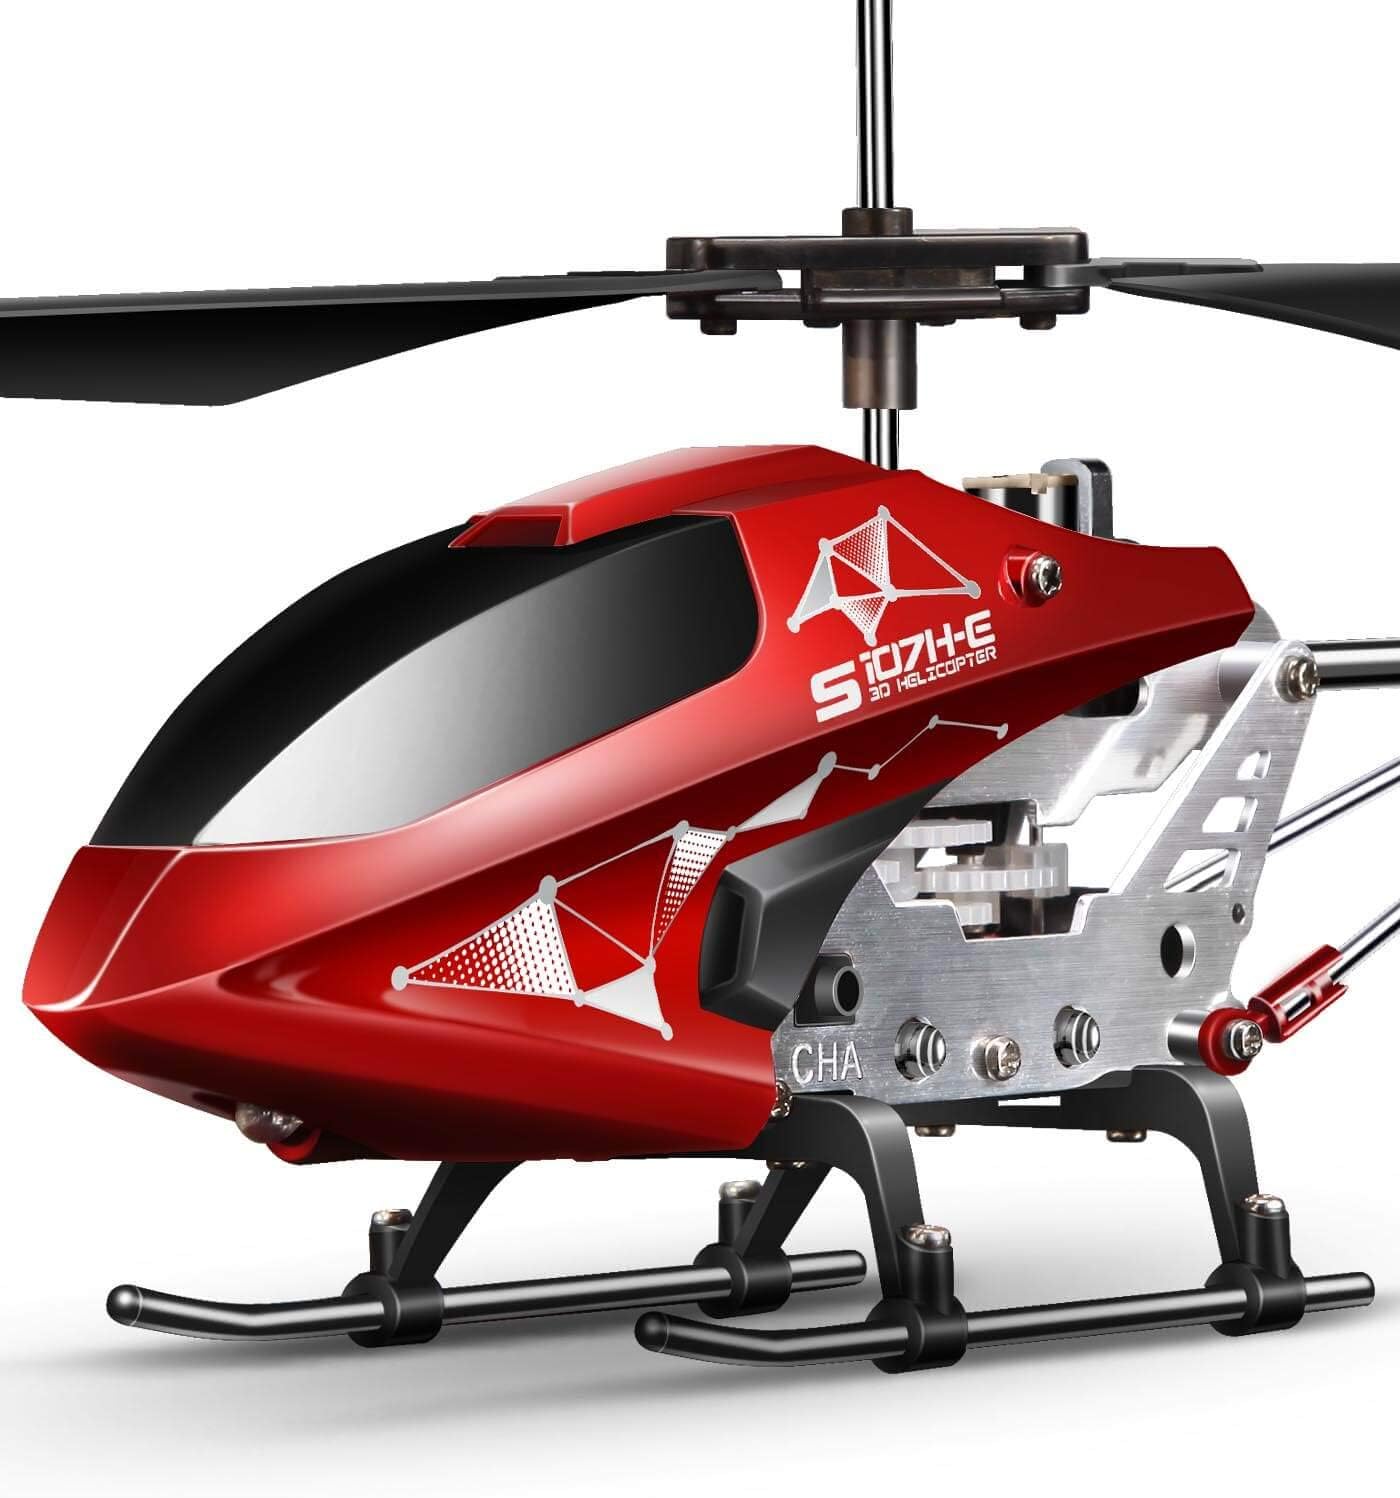 SYMA S107H-E Remote Control Helicopter: The Perfect Toy for Kids and Beginners